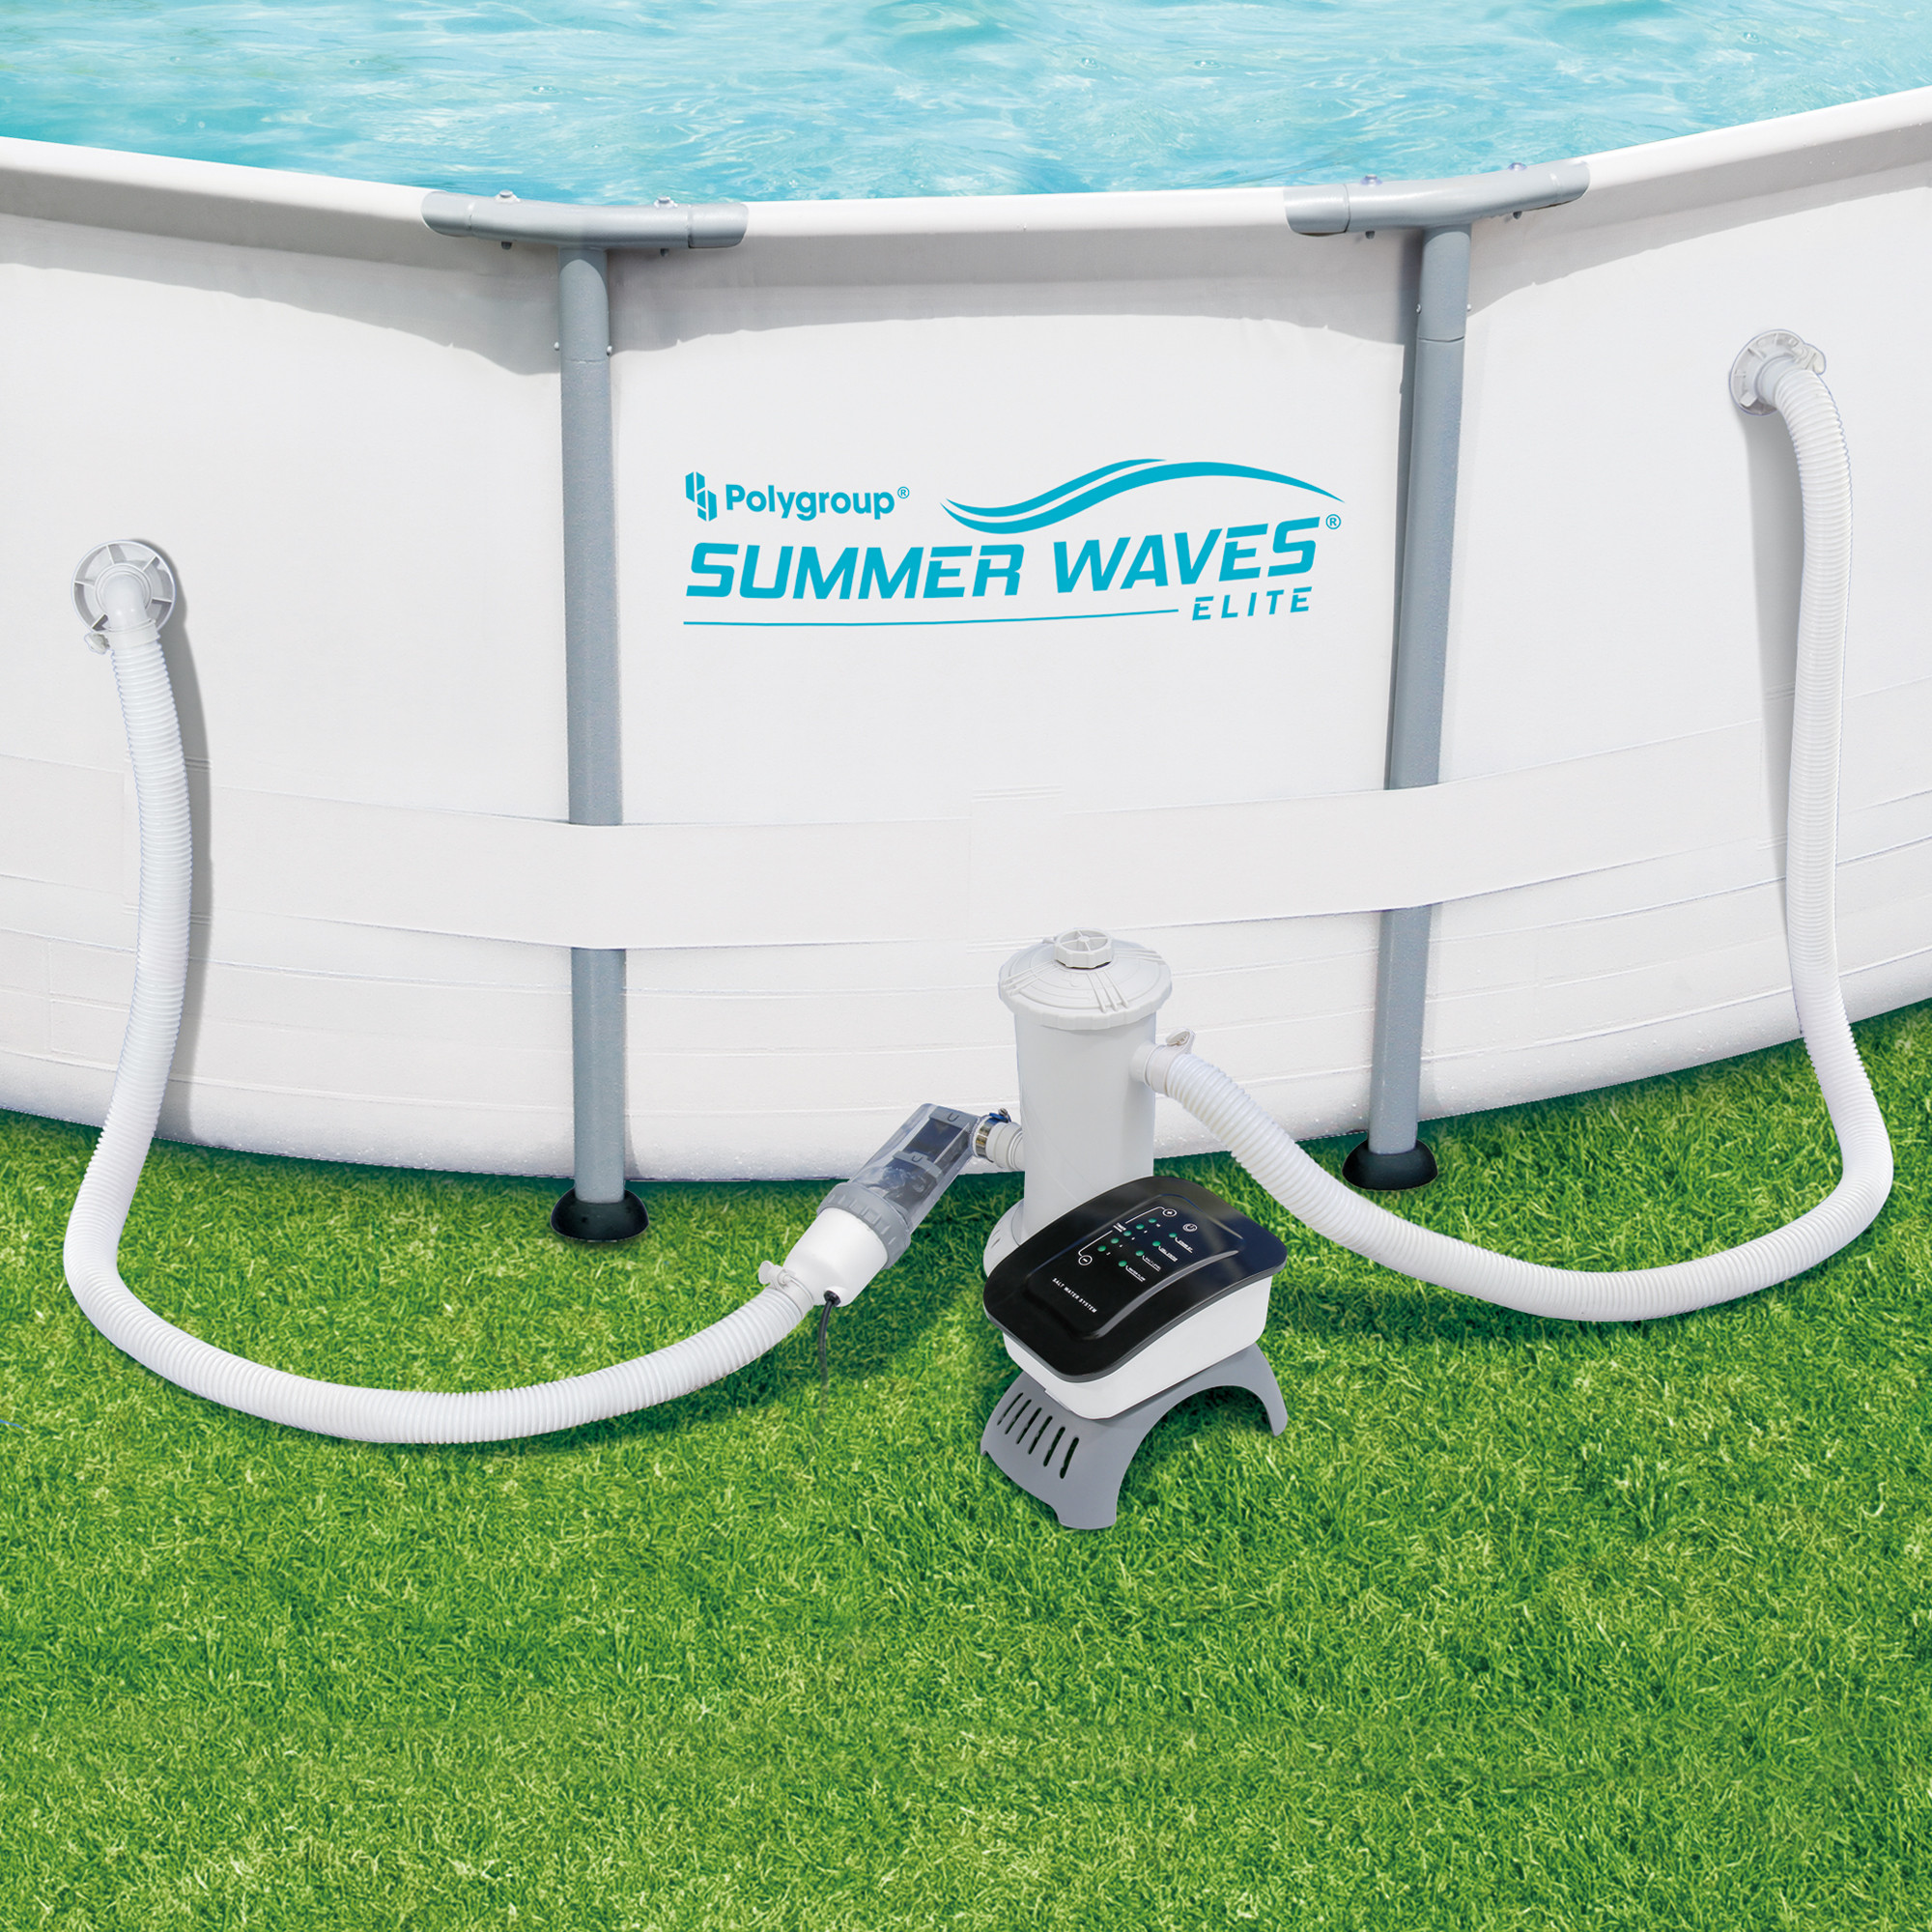 Summer Waves Above Ground Pool
 Summer Waves Salt Water Pool System for Ground Pools